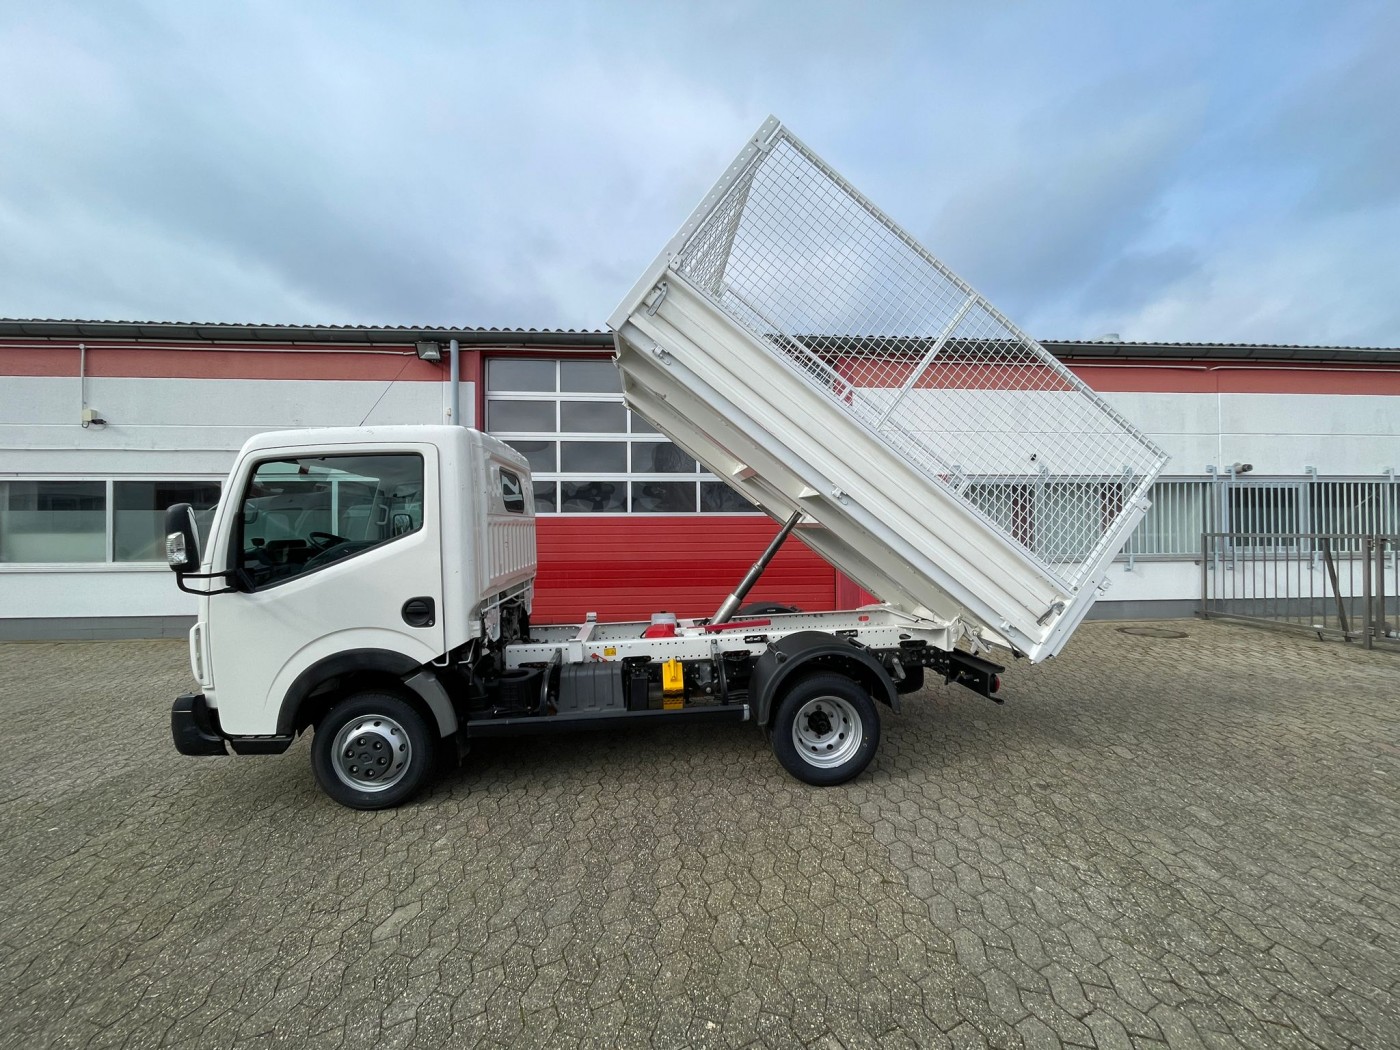 Renault  Maxity 140.35 tipper 3 seats 1415 kg payload!